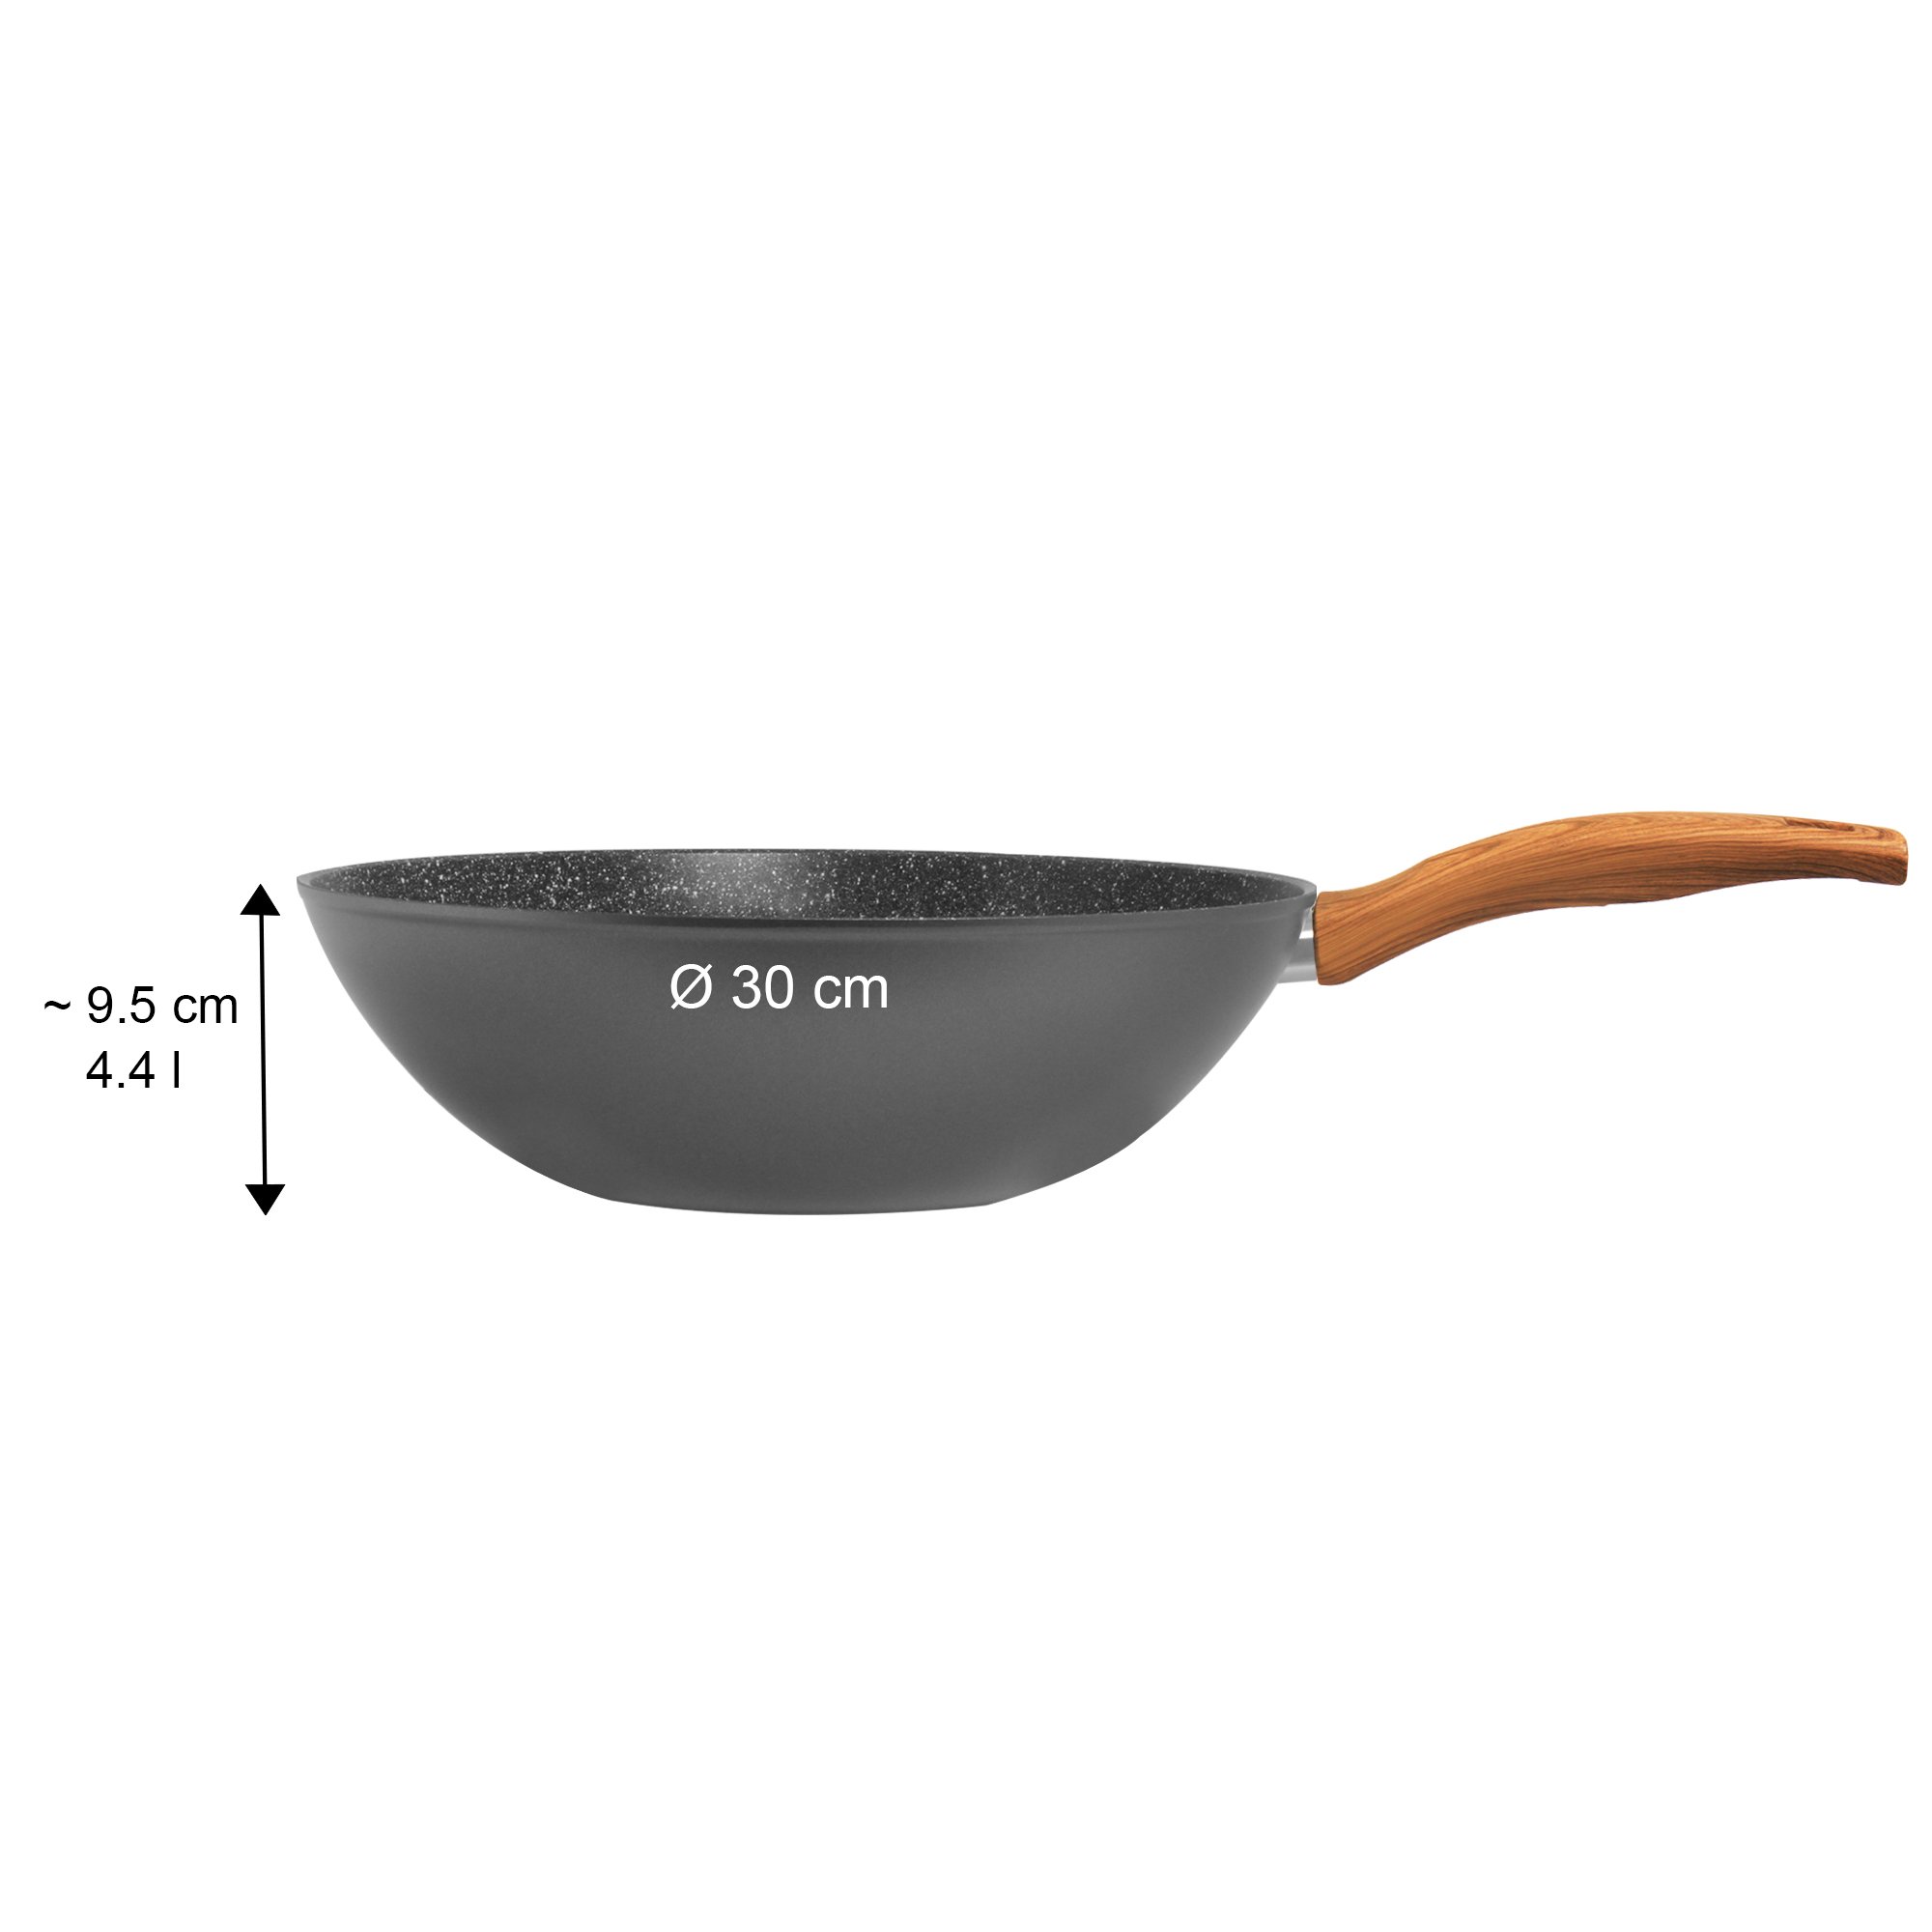 STONELINE® Wok Pan 30 cm, Non-Stick | Made in Germany | Wood Design, Back to Nature